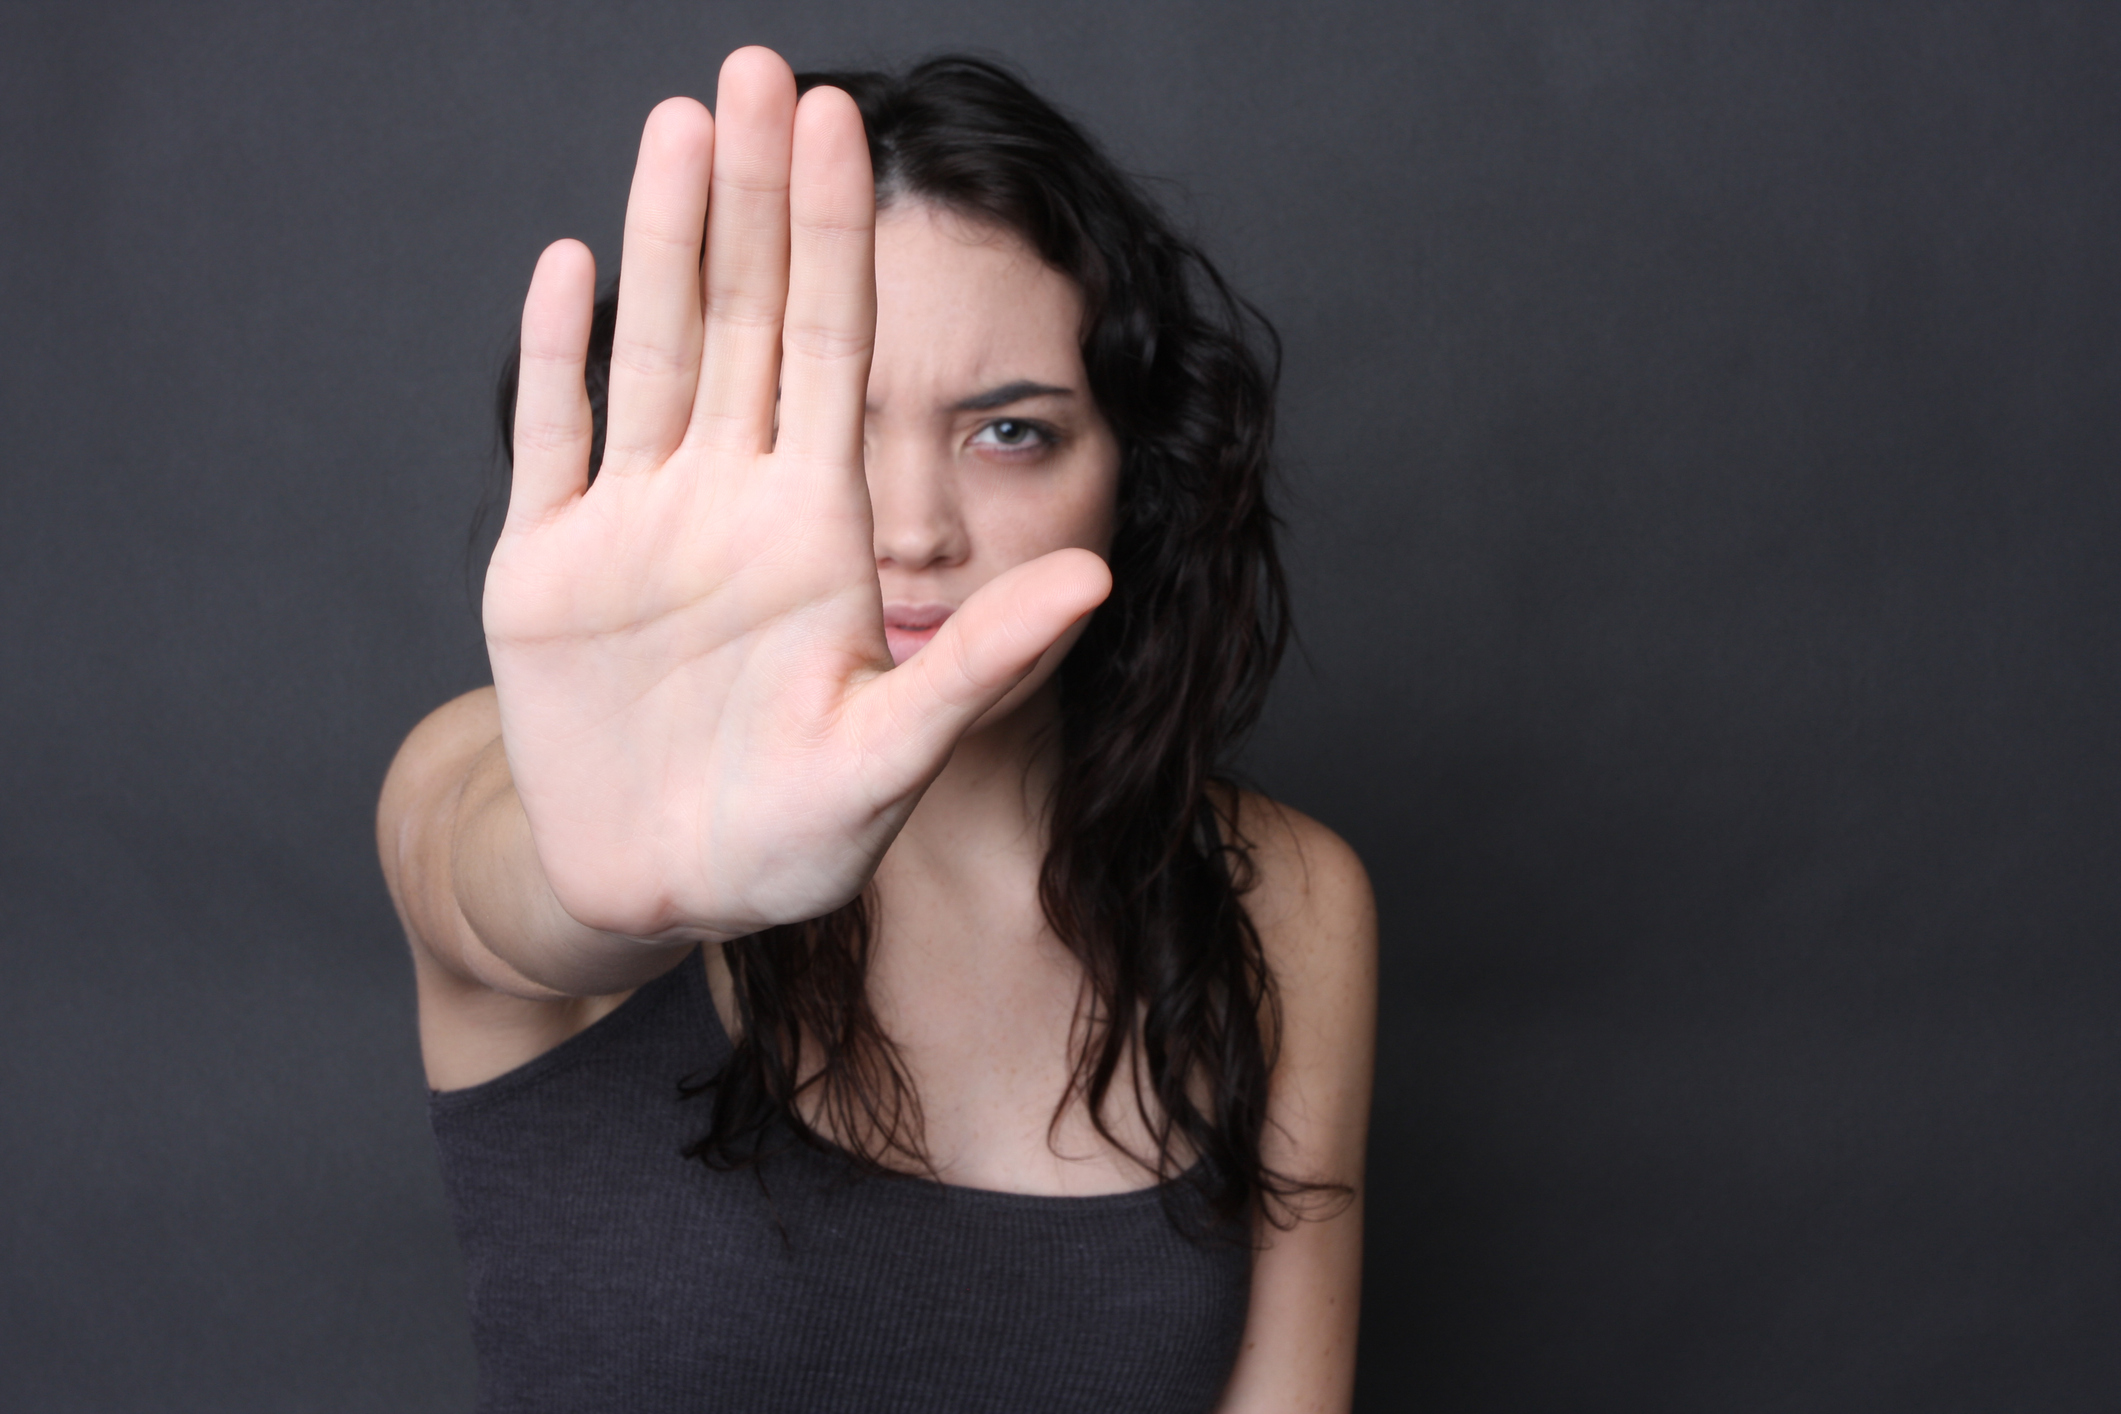 How To Get A Narcissist to Reveal Themselves